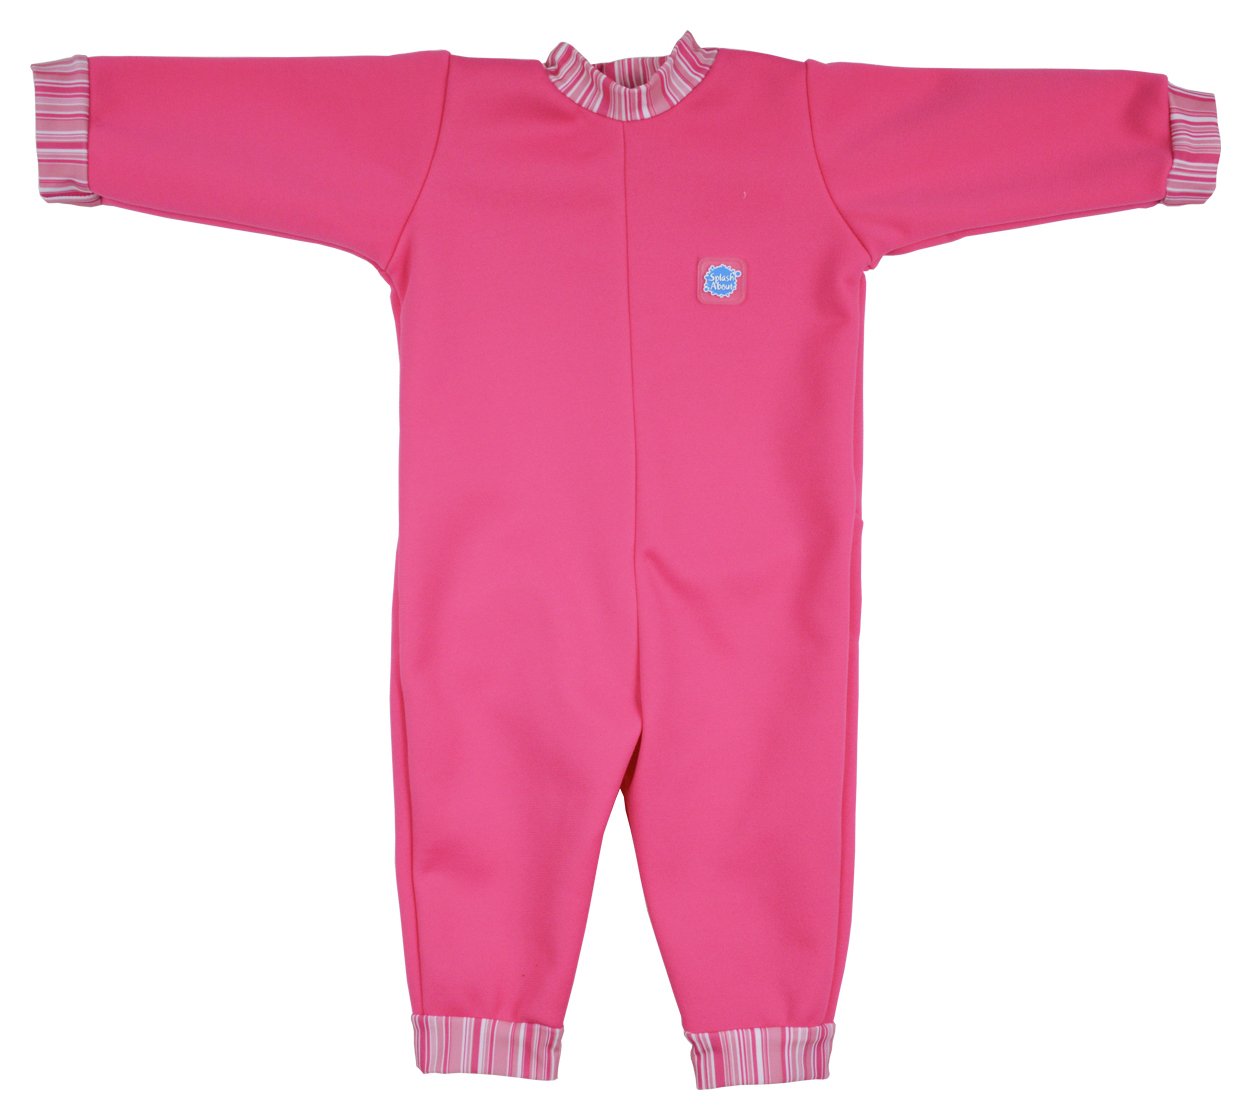 Warm In One Pink Candy Stripe Wetsuit - 0-3 Months. Review